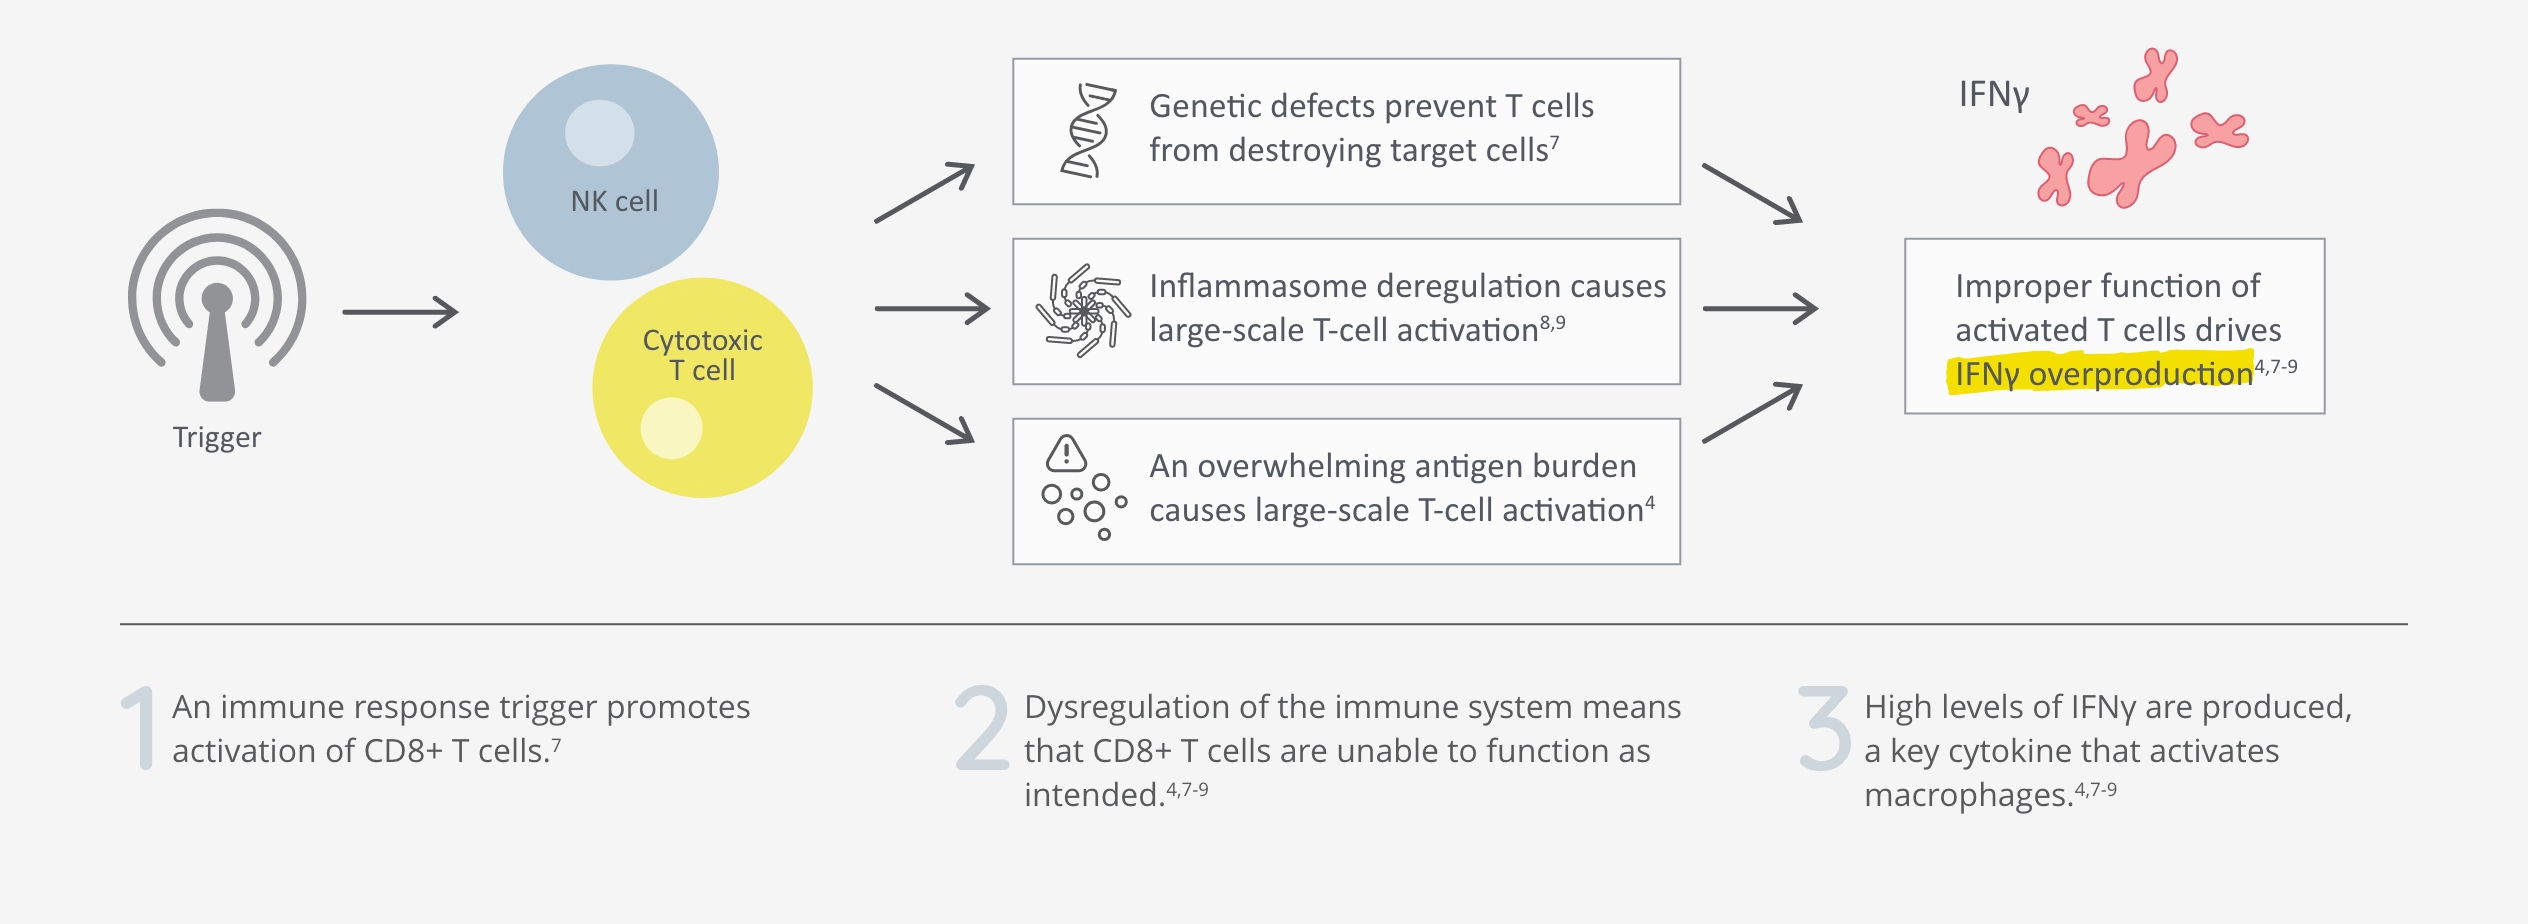 HLH mechanism of disease with T-cell dysfunction and interferon gamma overproduction